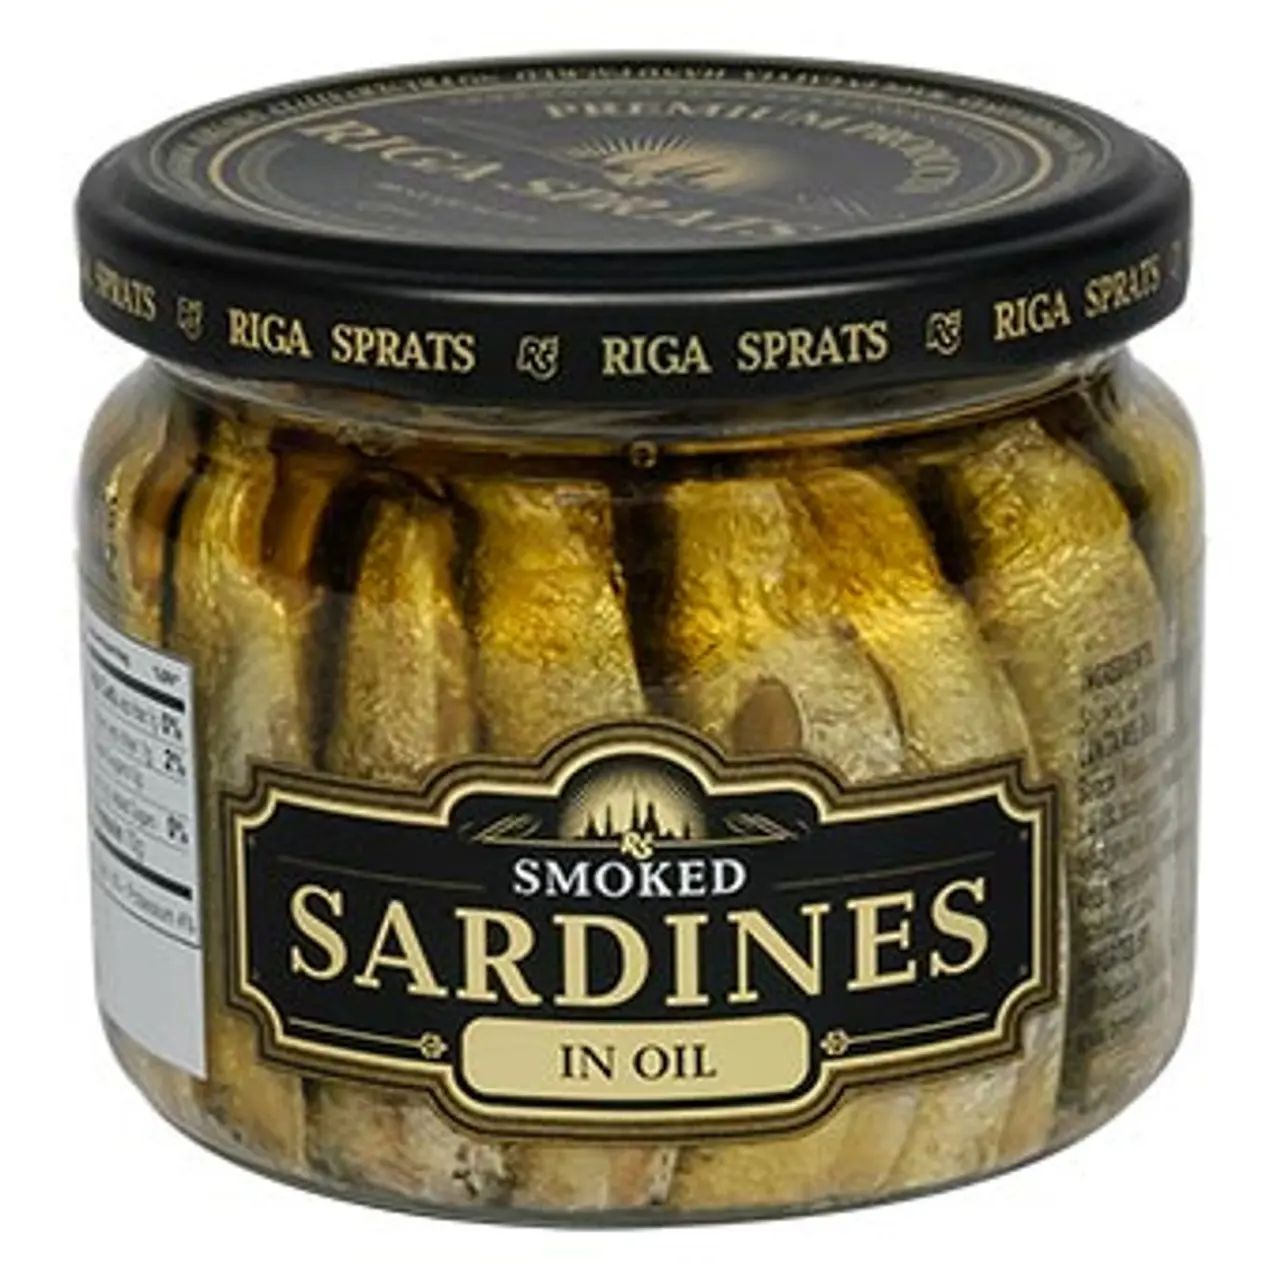 riga gold smoked sardines in oil - How do you eat smoked sprats in oil